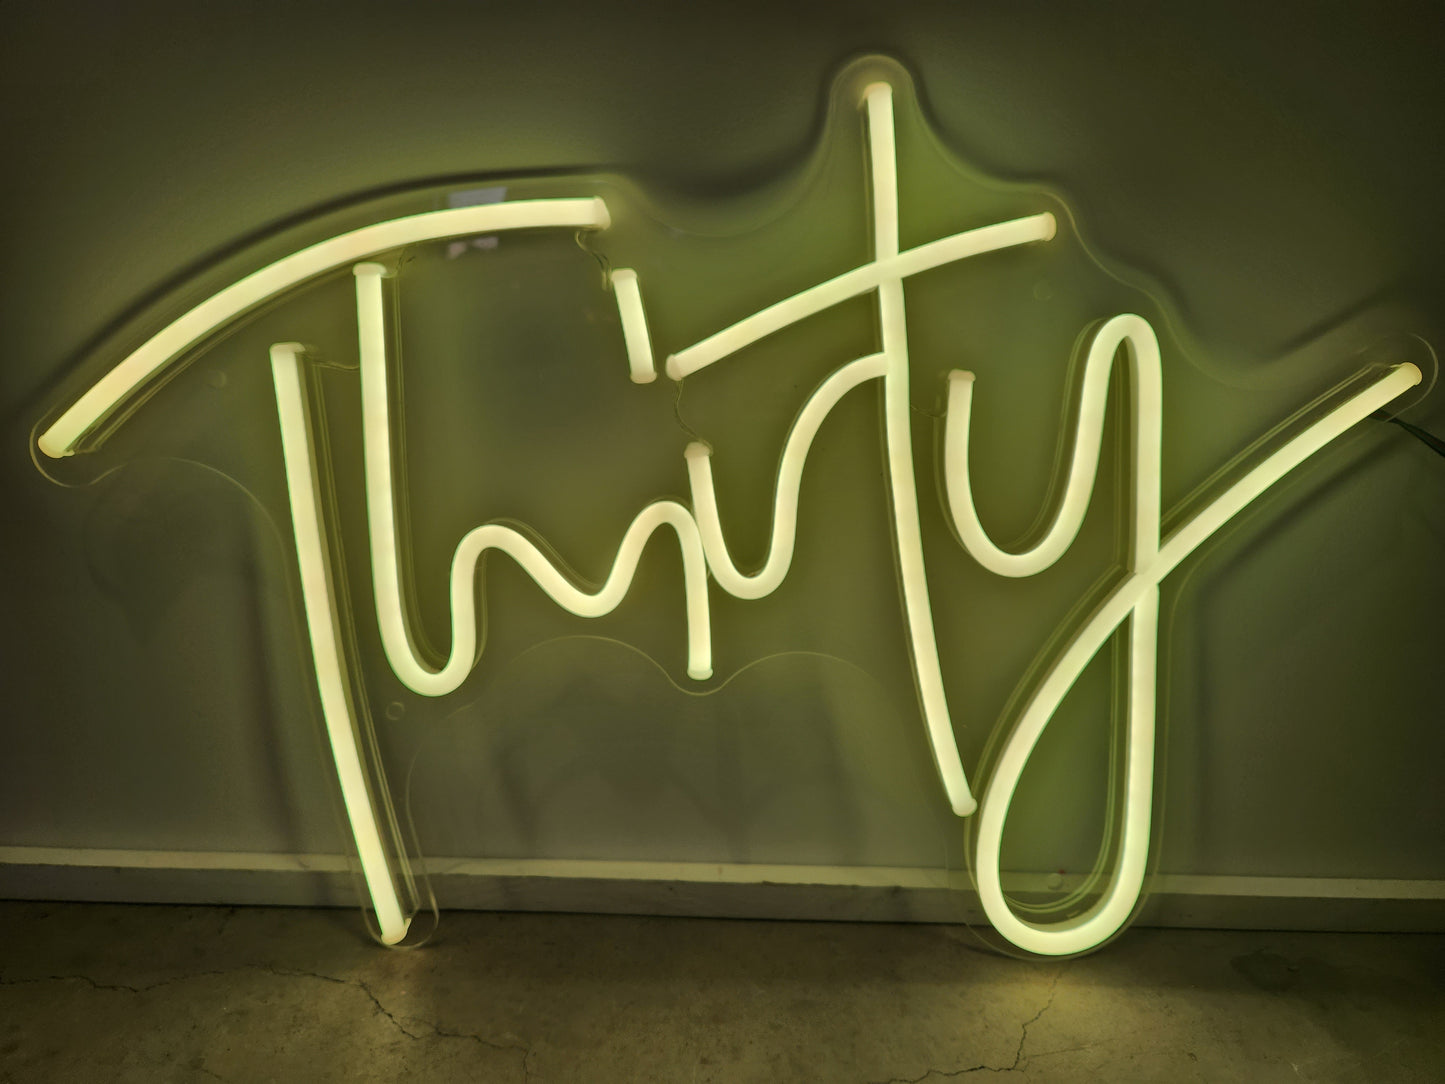 Thirty (30) Neon Sign